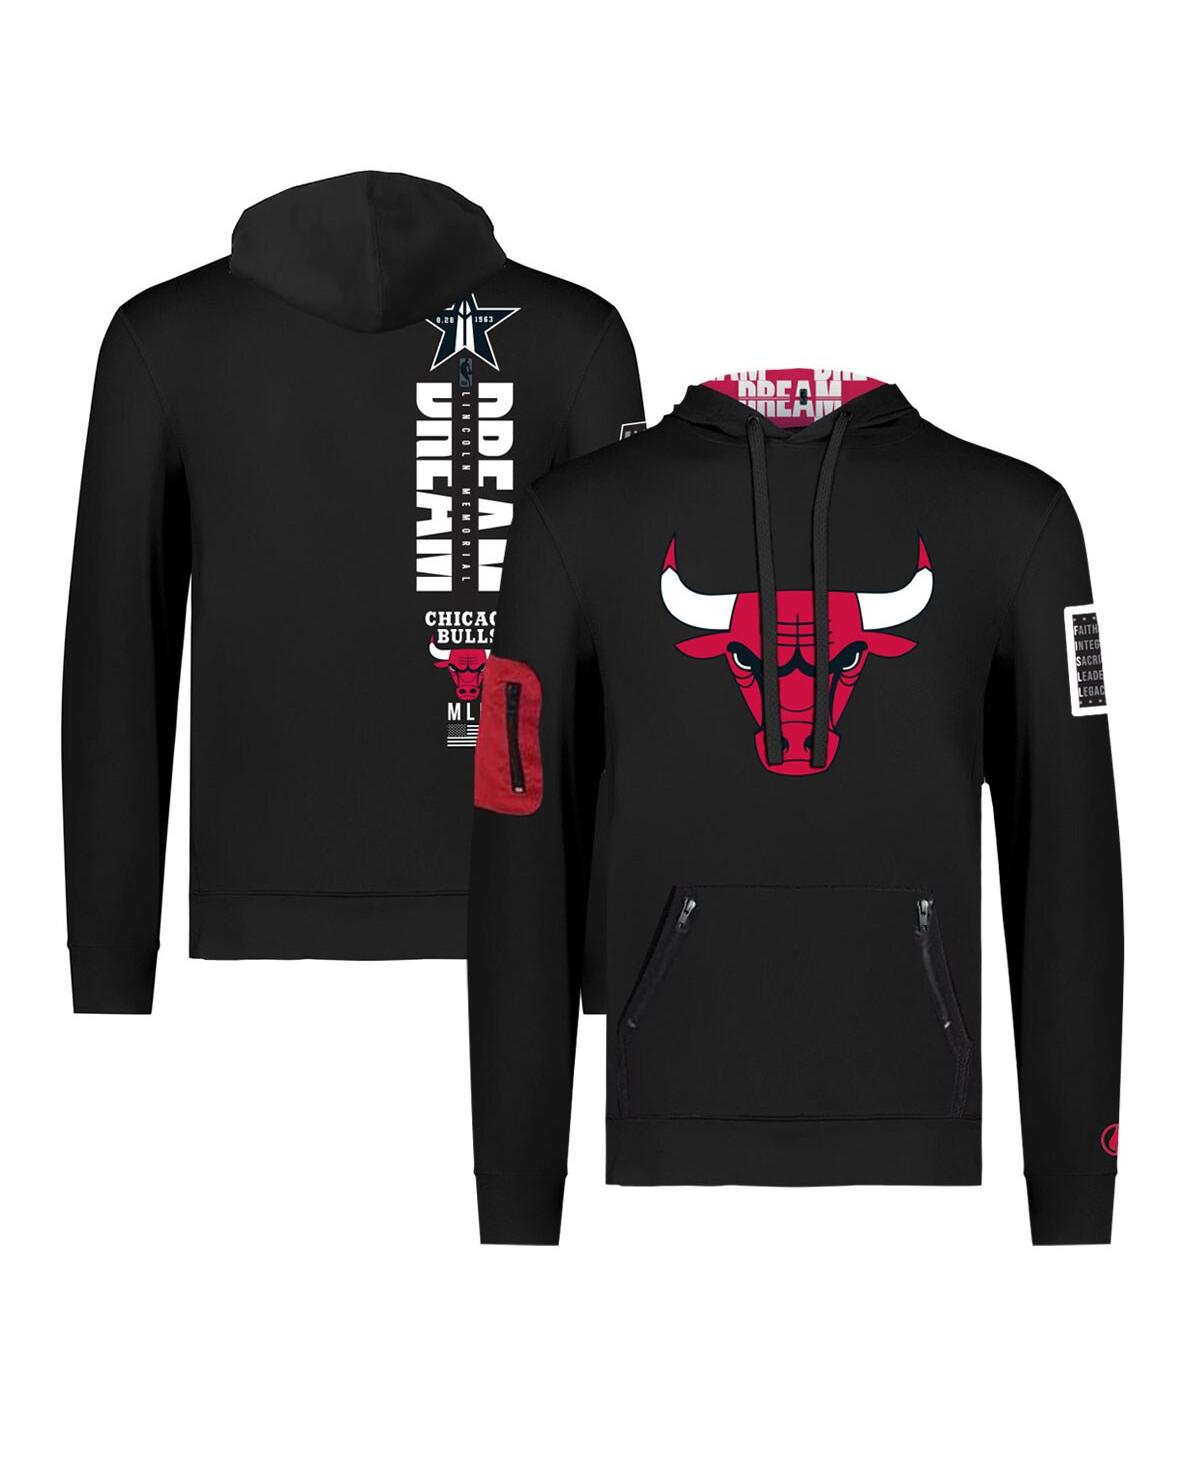 Men's and Women's Fisll x Black History Collection Black Chicago Bulls Pullover Hoodie - Black